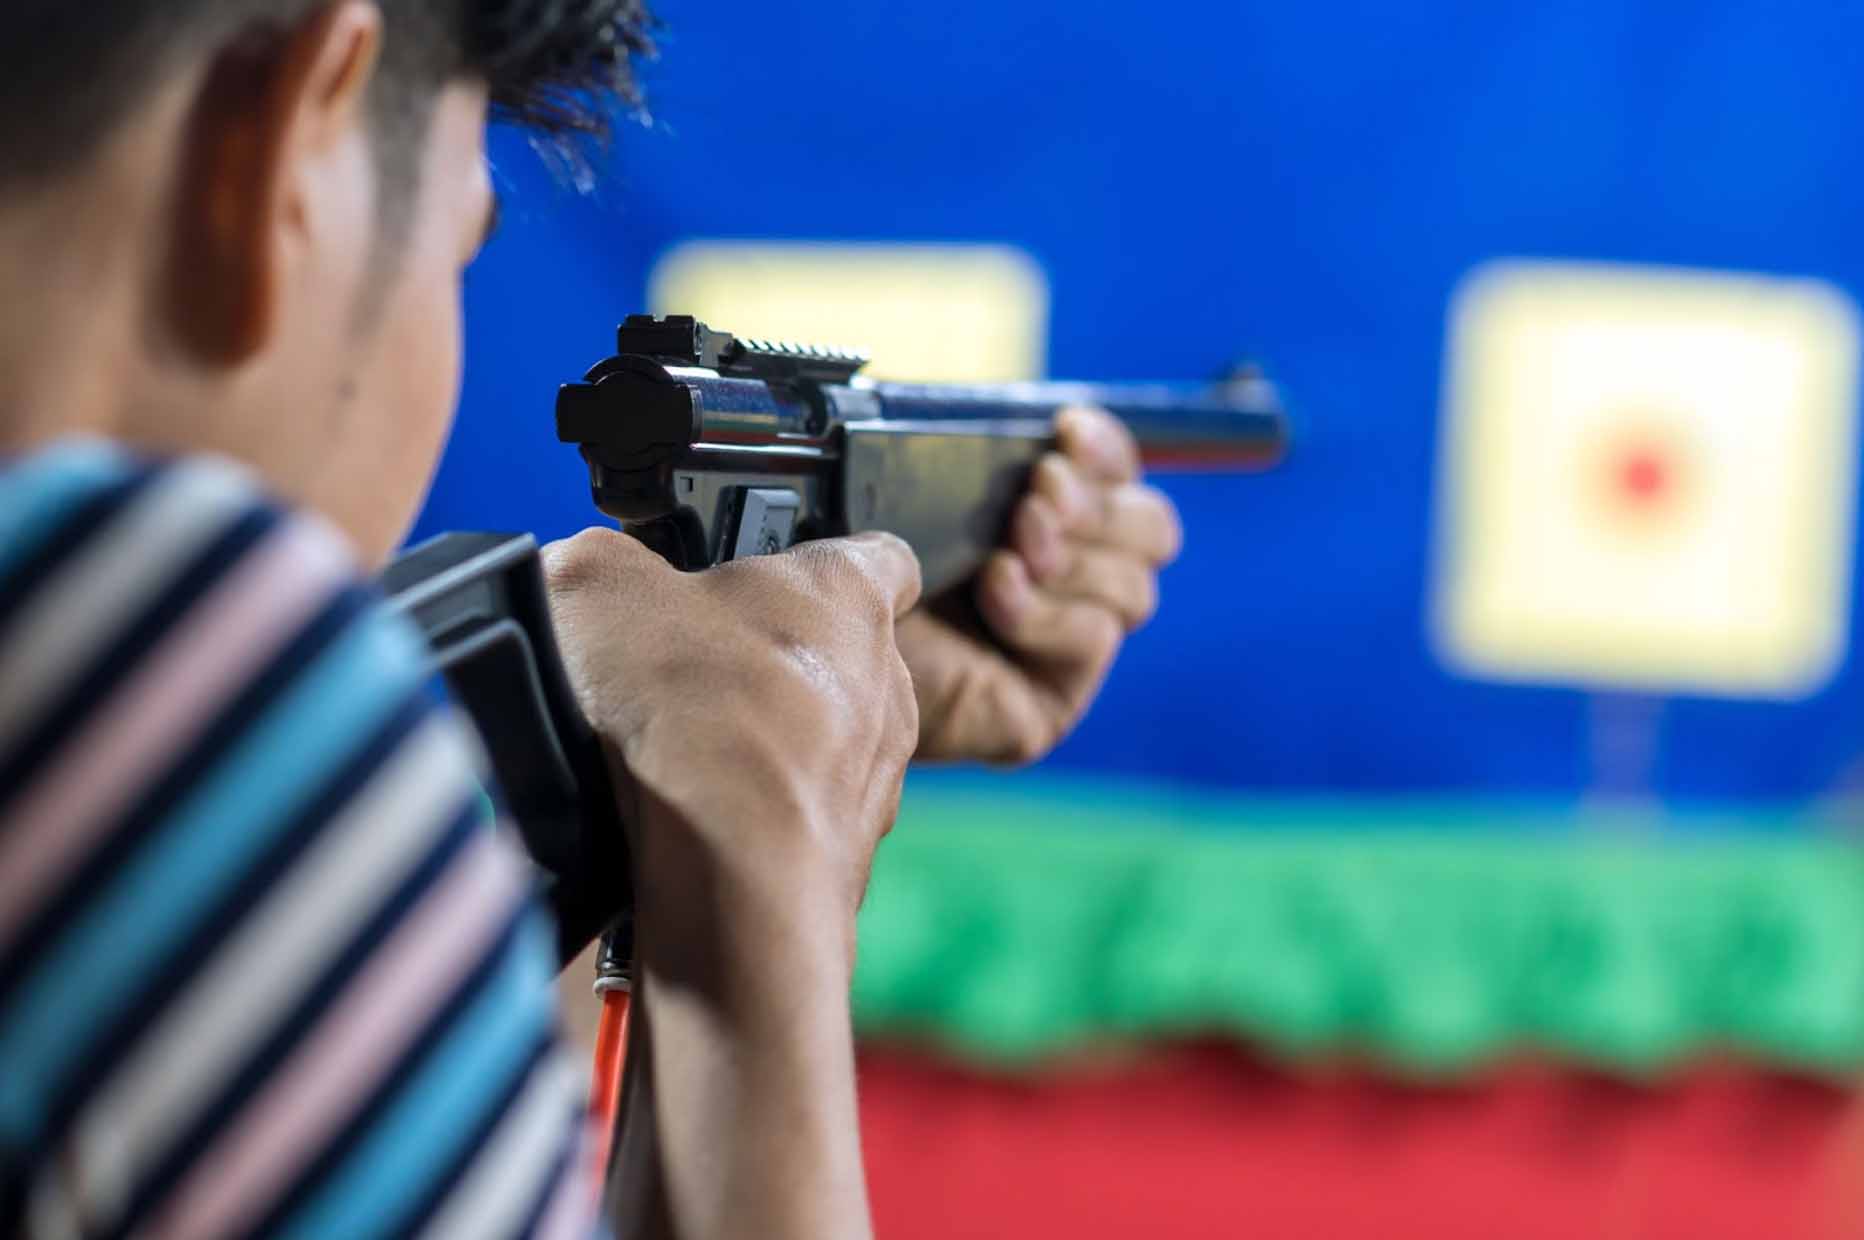 A rear view of a man in a striped shirt aiming his gun at a target in a practice shooting range.